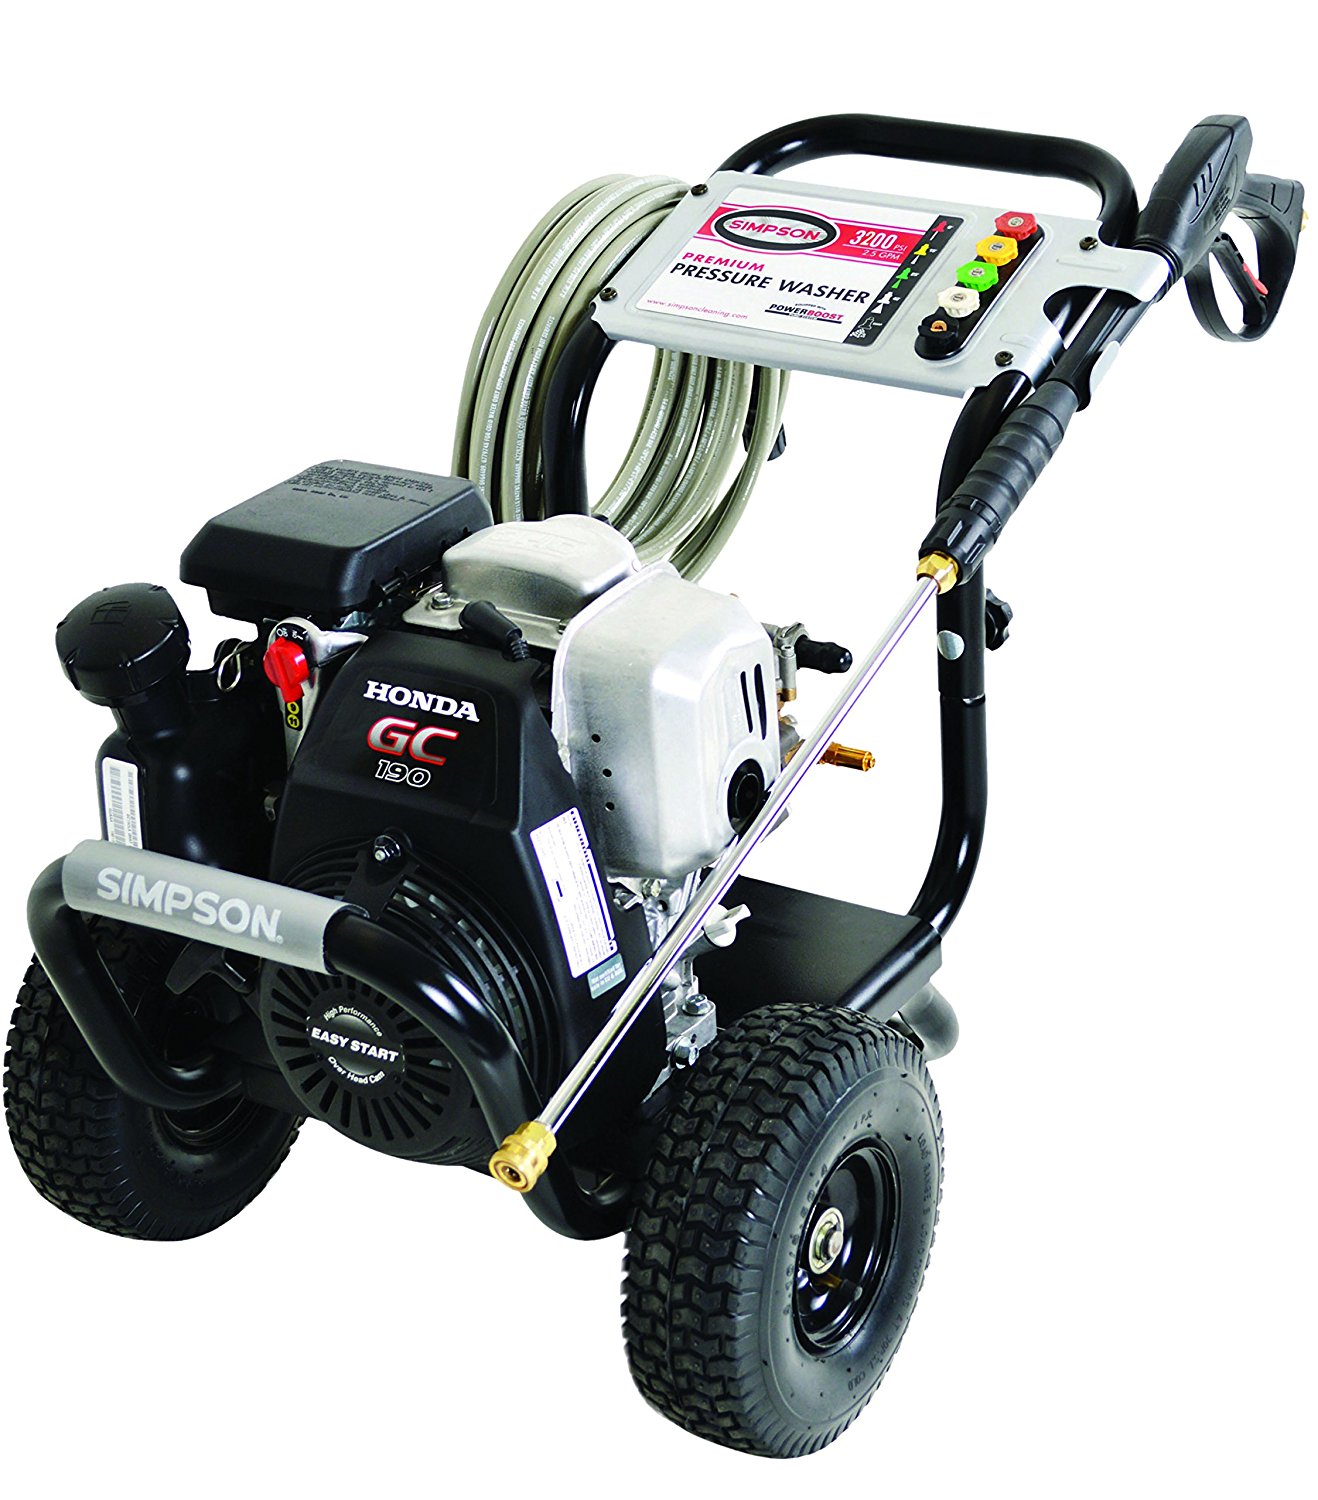 SIMPSON MSH3125-S Gas Pressure Washer